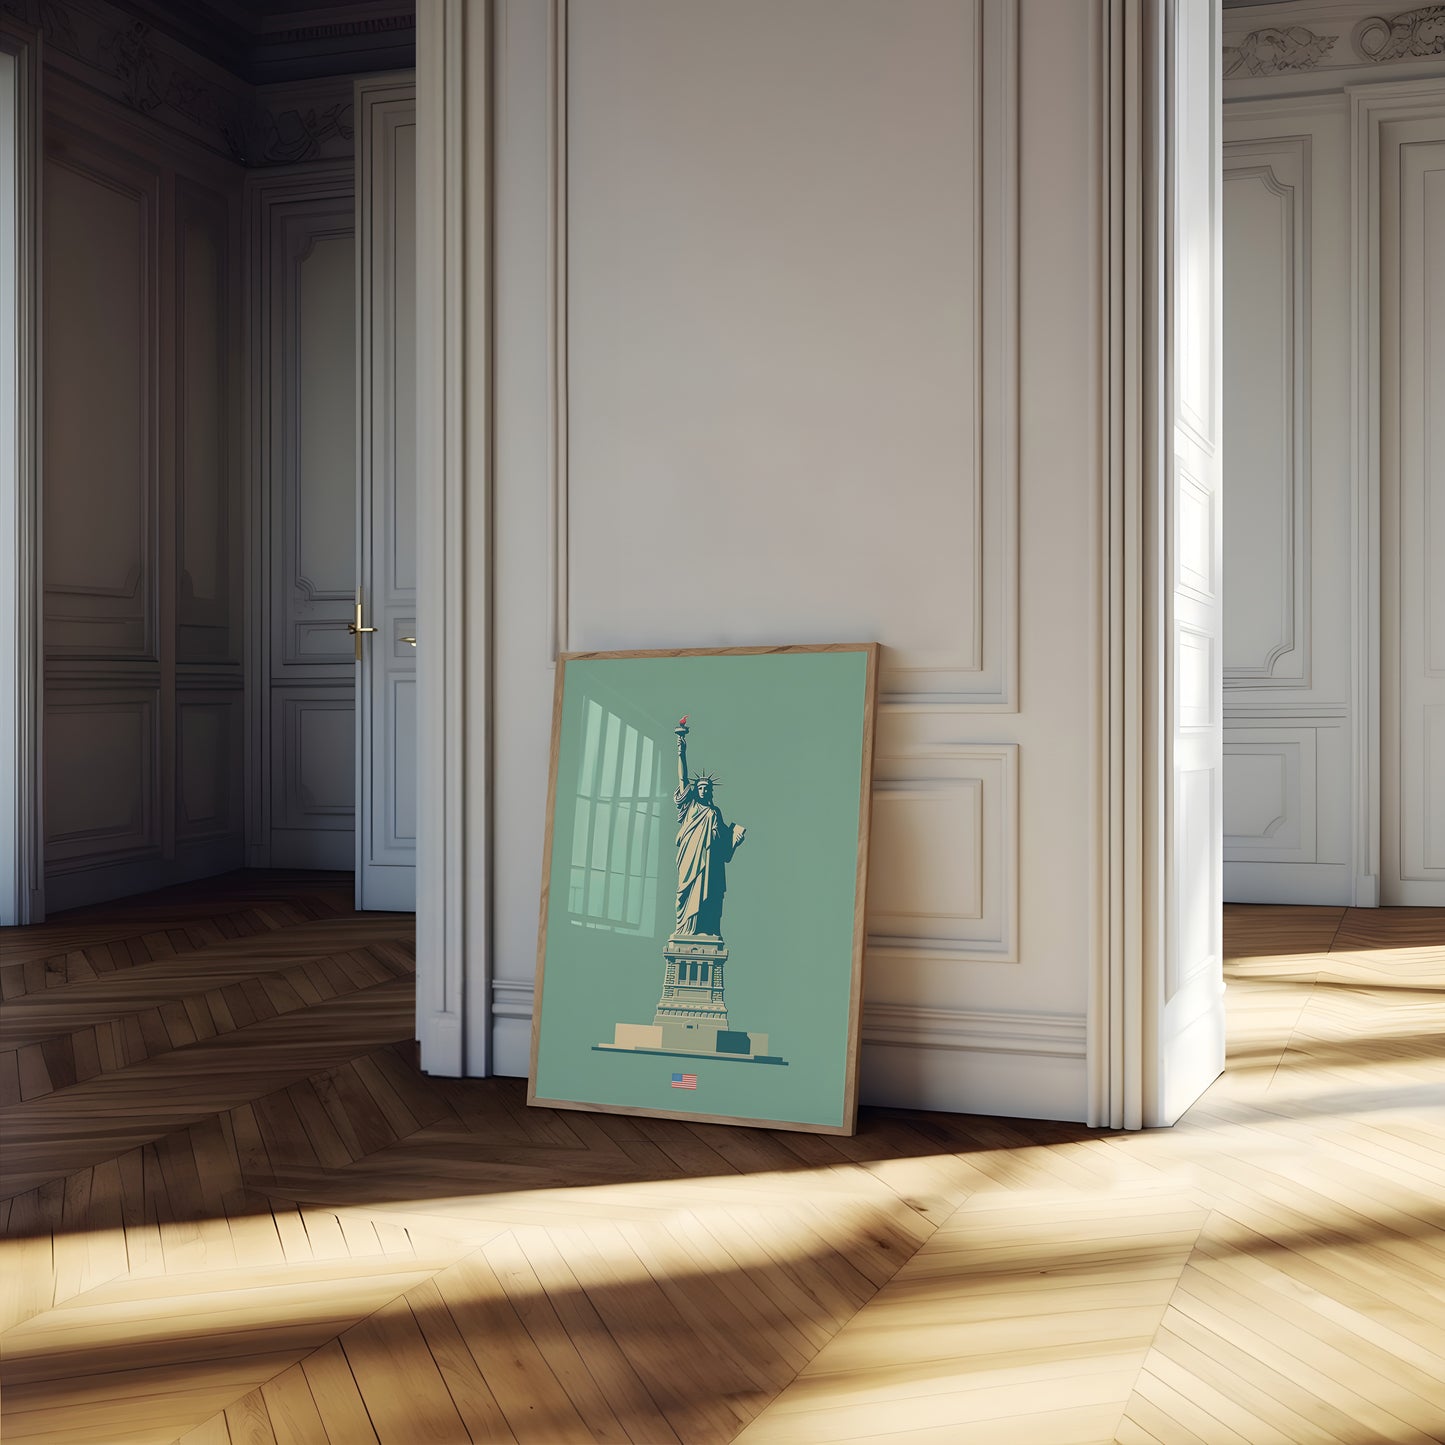 Painting of the Statue of Liberty leaning against a wall in an elegant room with sunlight streaming in.